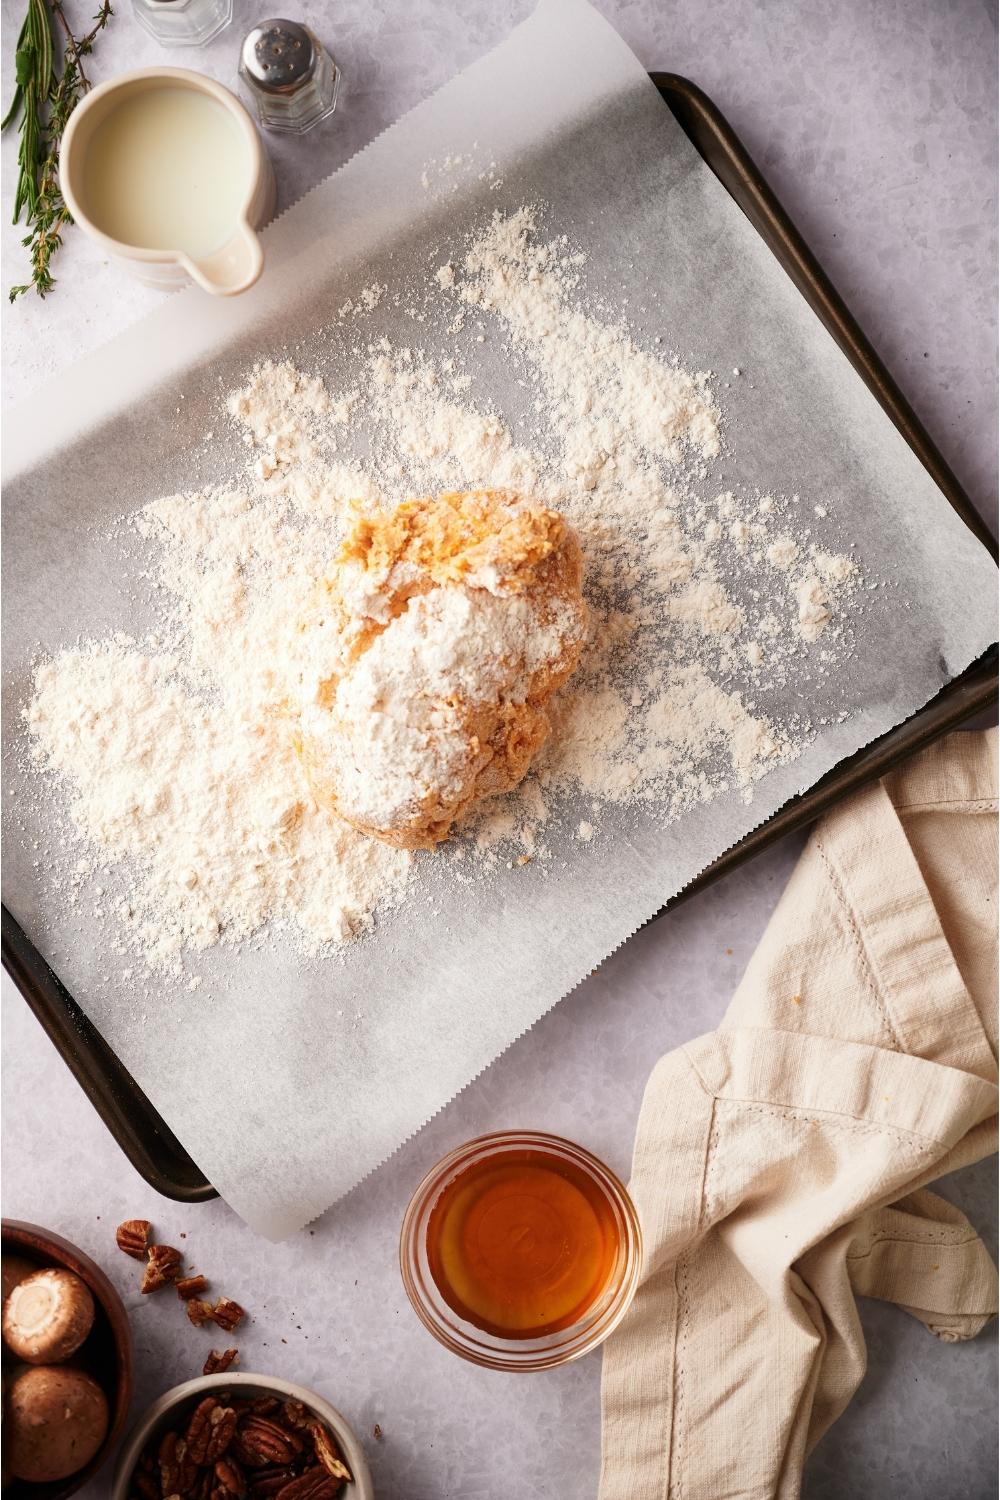 A baking sheet lined with parchment paper and biscuit dough covered in flour on the baking sheet.